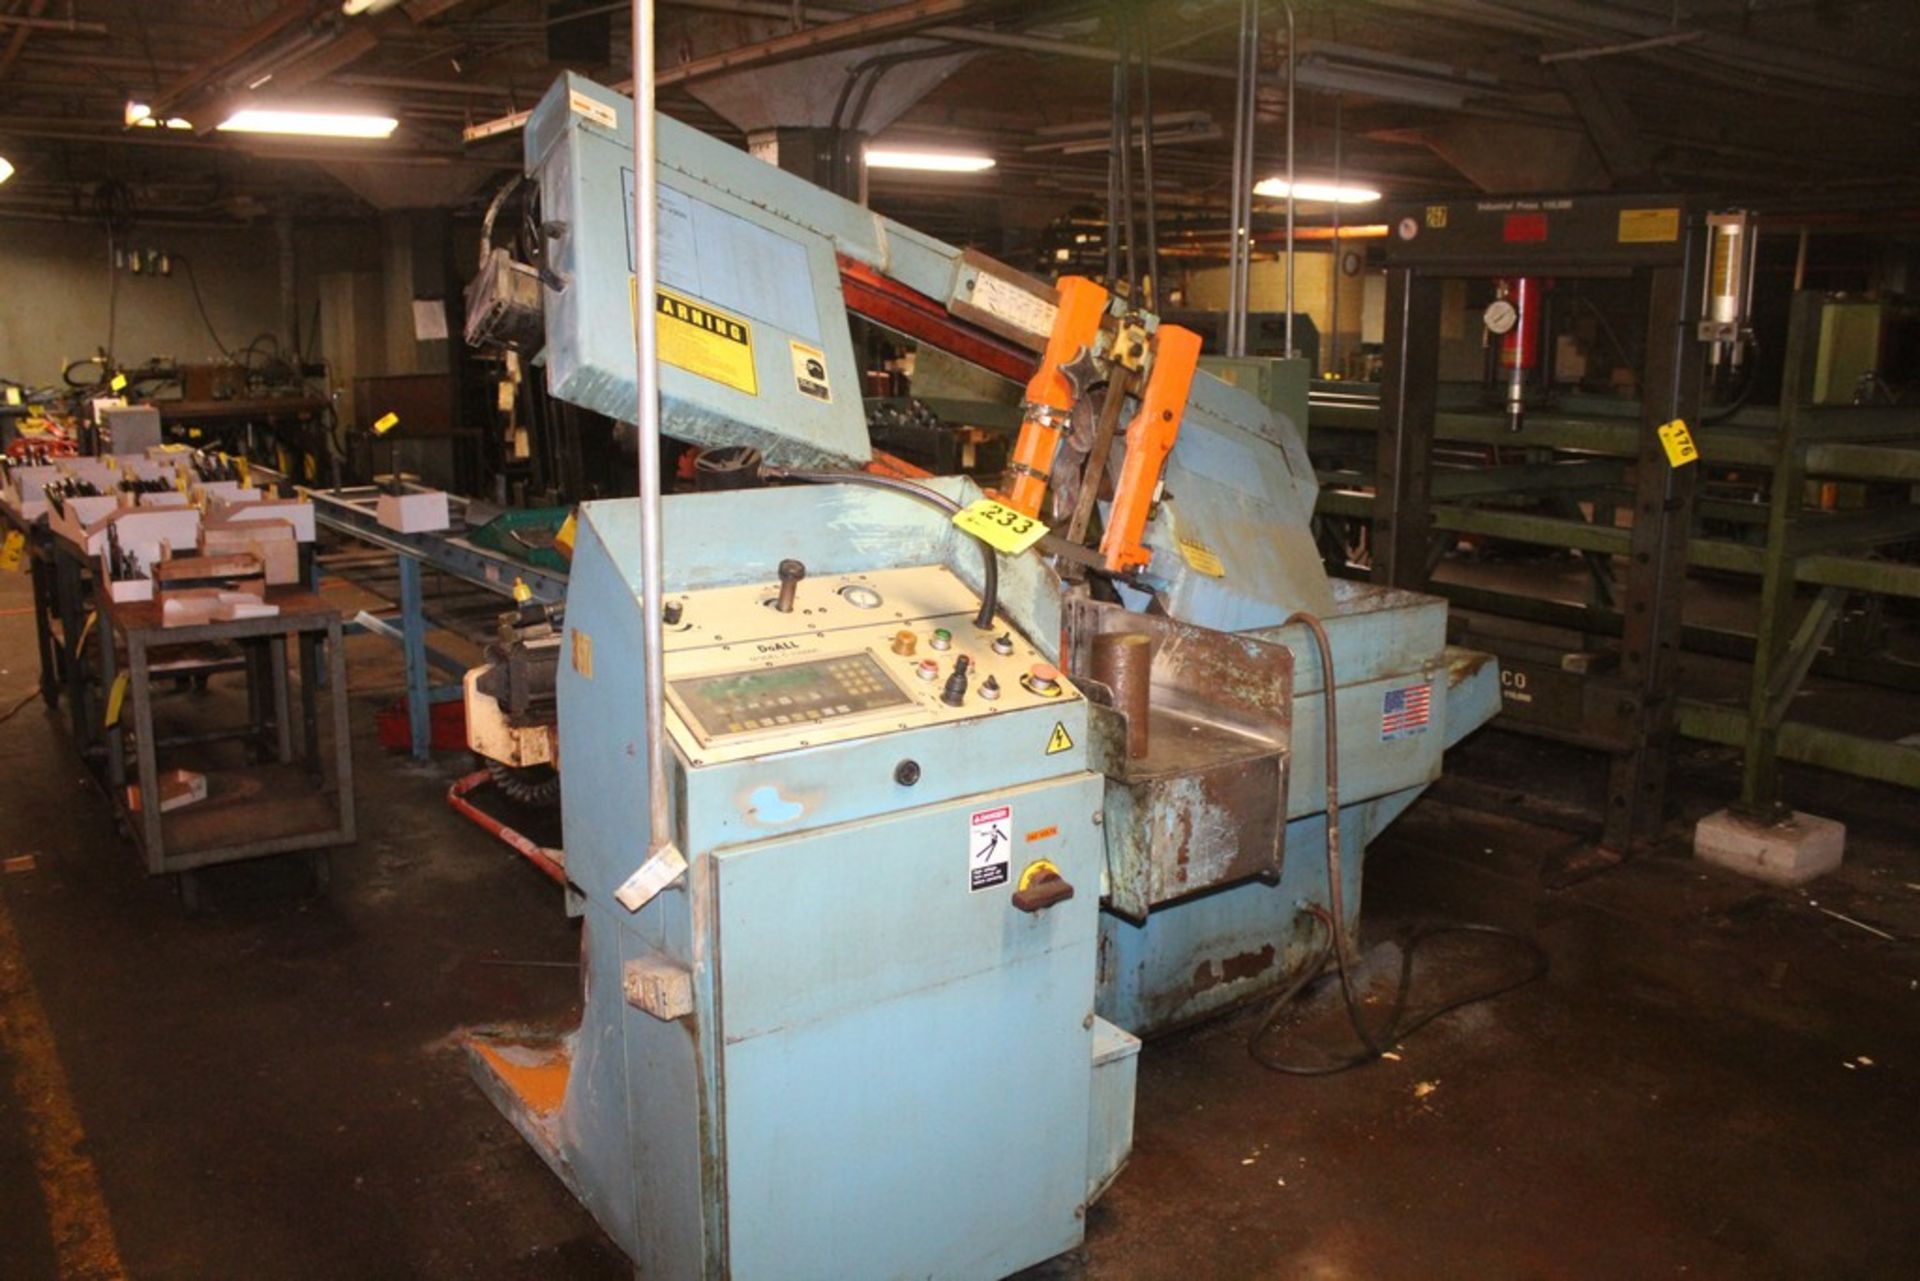 DOALL 13" X13" MODEL C-3300NC PROGRAMMABLE AUTOMATIC FEED HORIZONTAL BAND SAW, S/N 521-96157